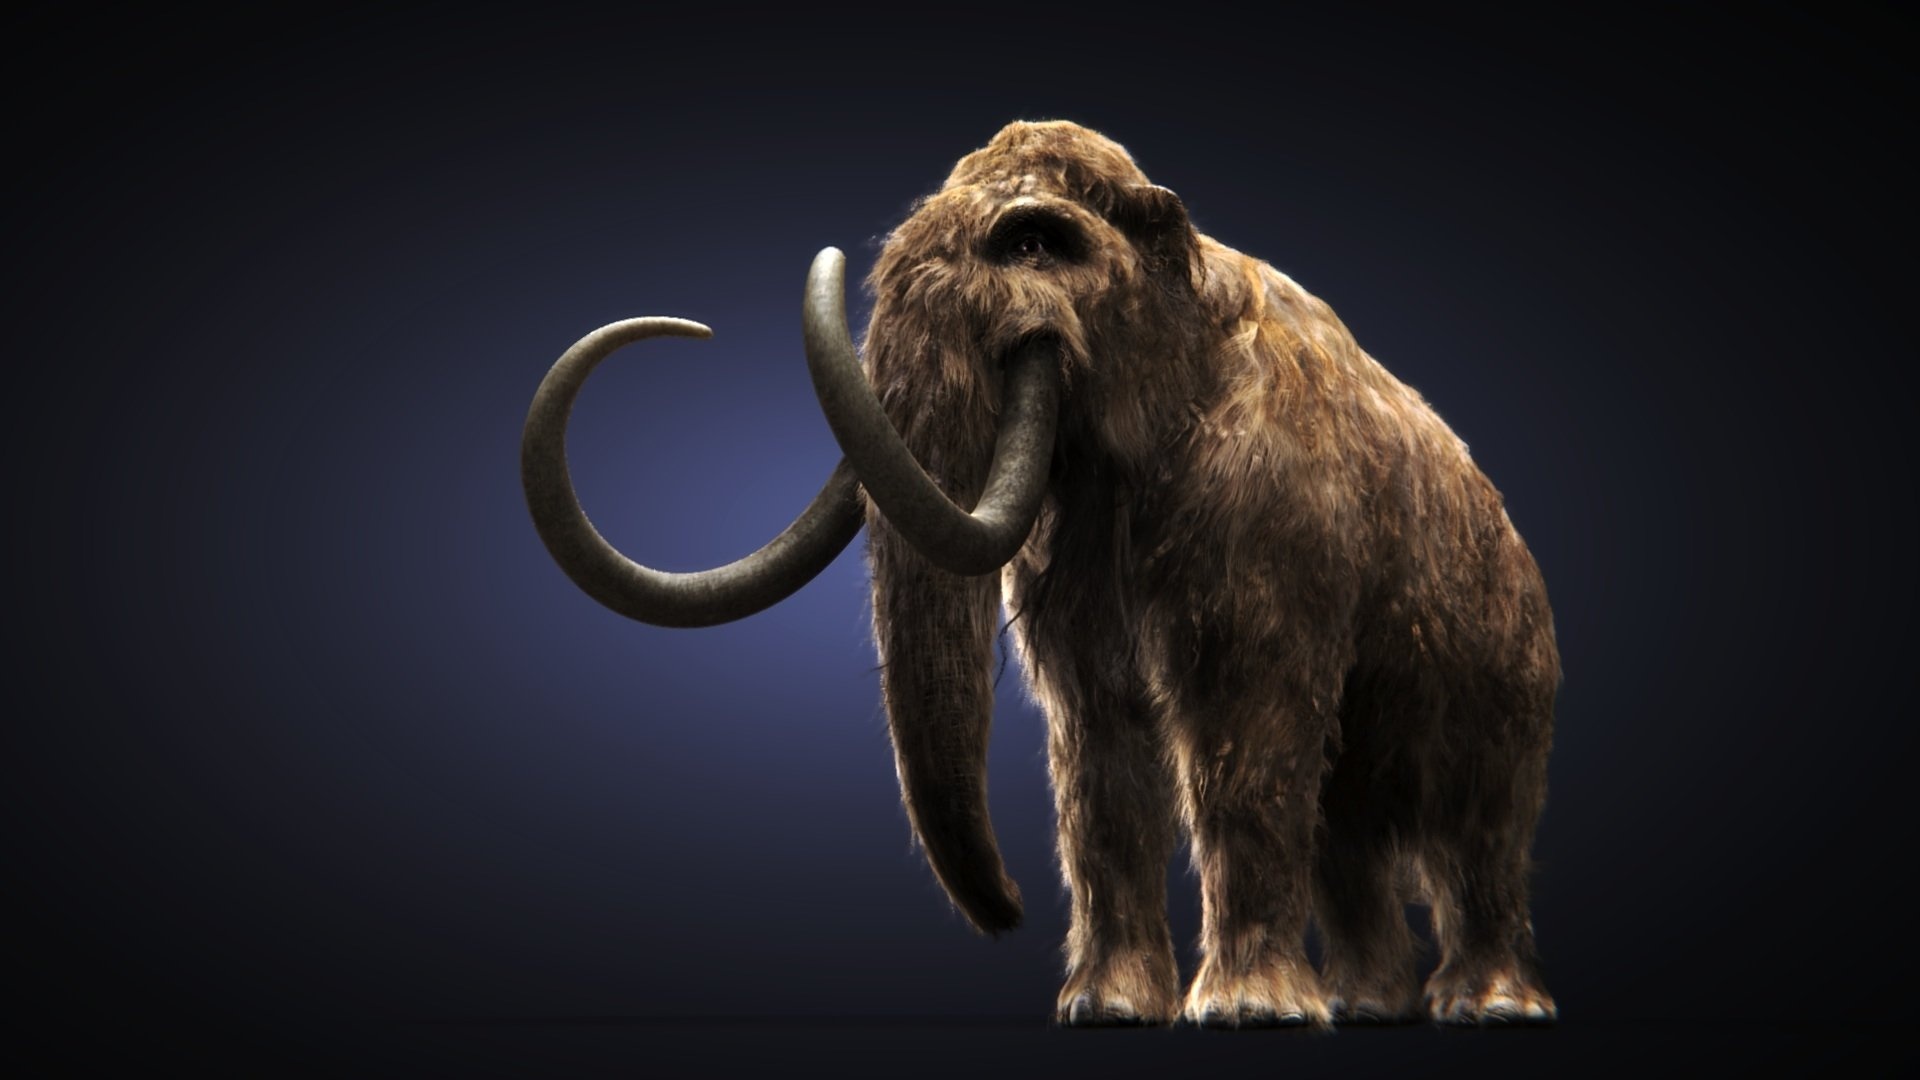 Mammoth HD wallpapers, Top free backgrounds, Mammoth scenery, HD backgrounds, 1920x1080 Full HD Desktop